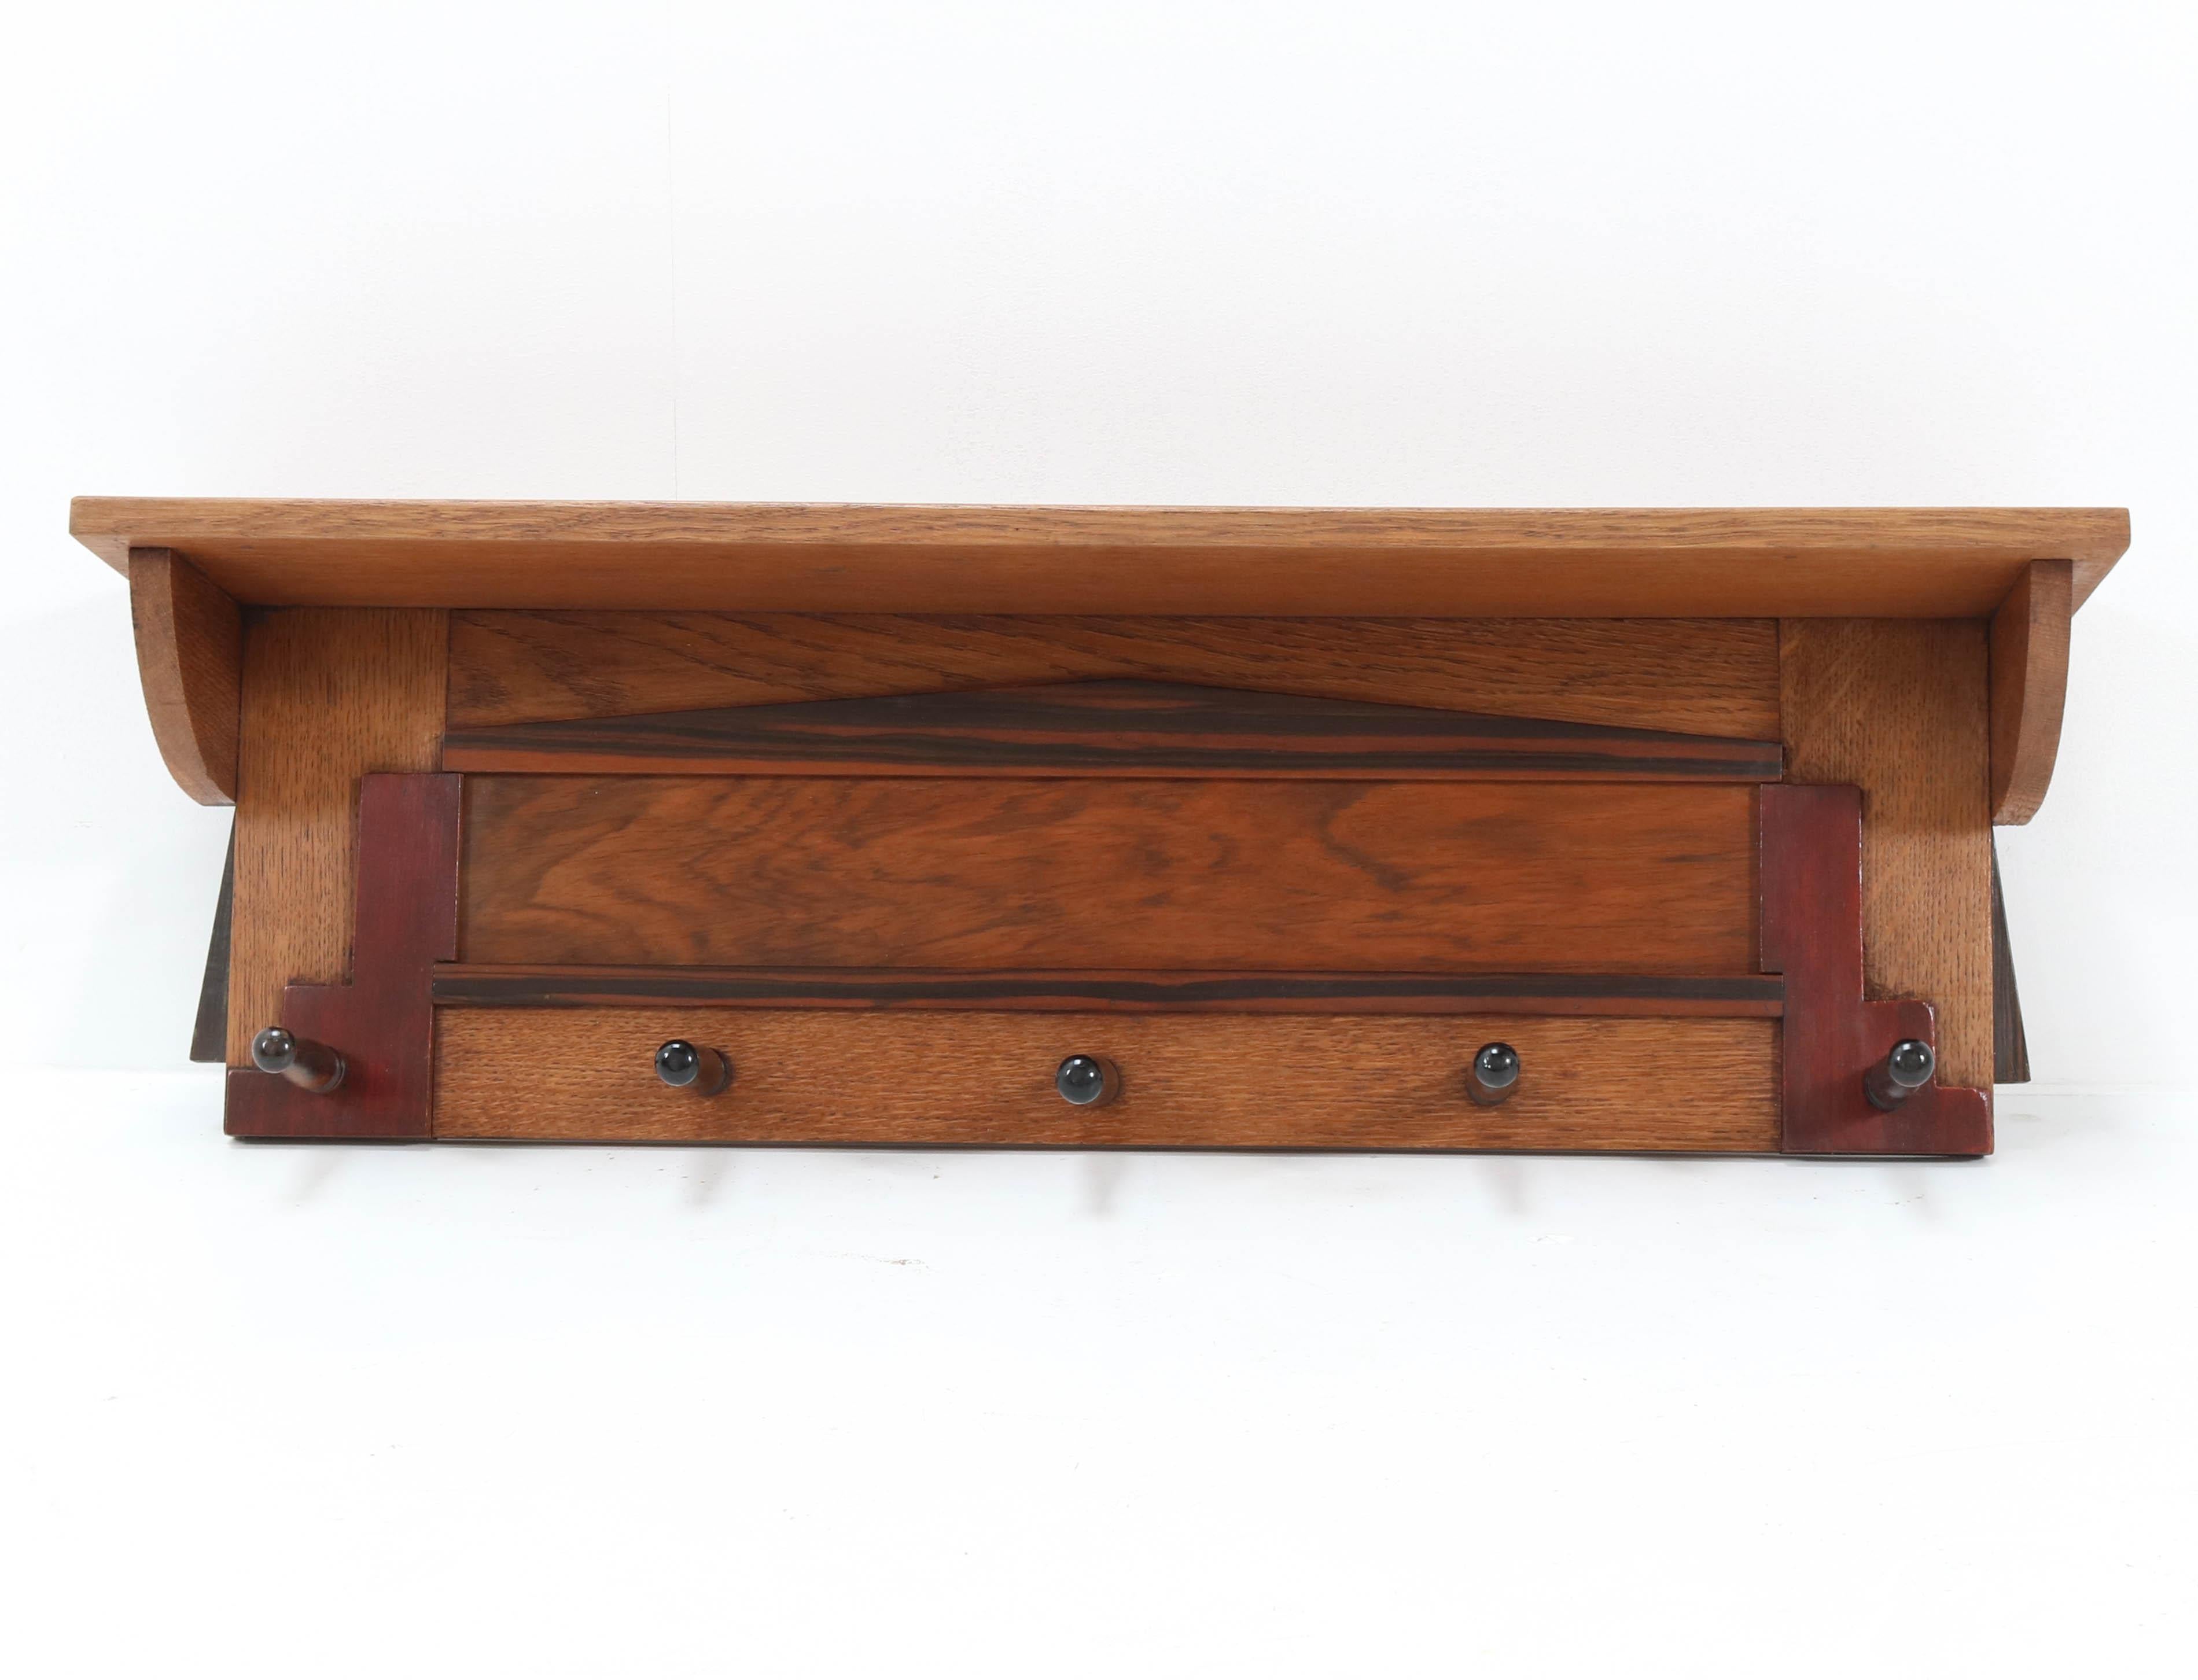 Stunning Art Deco Amsterdam School wall coat rack.
Striking Dutch design from the twenties.
Solid oak and solid macassar ebony and mahogany.
In very good condition with a beautiful patina.